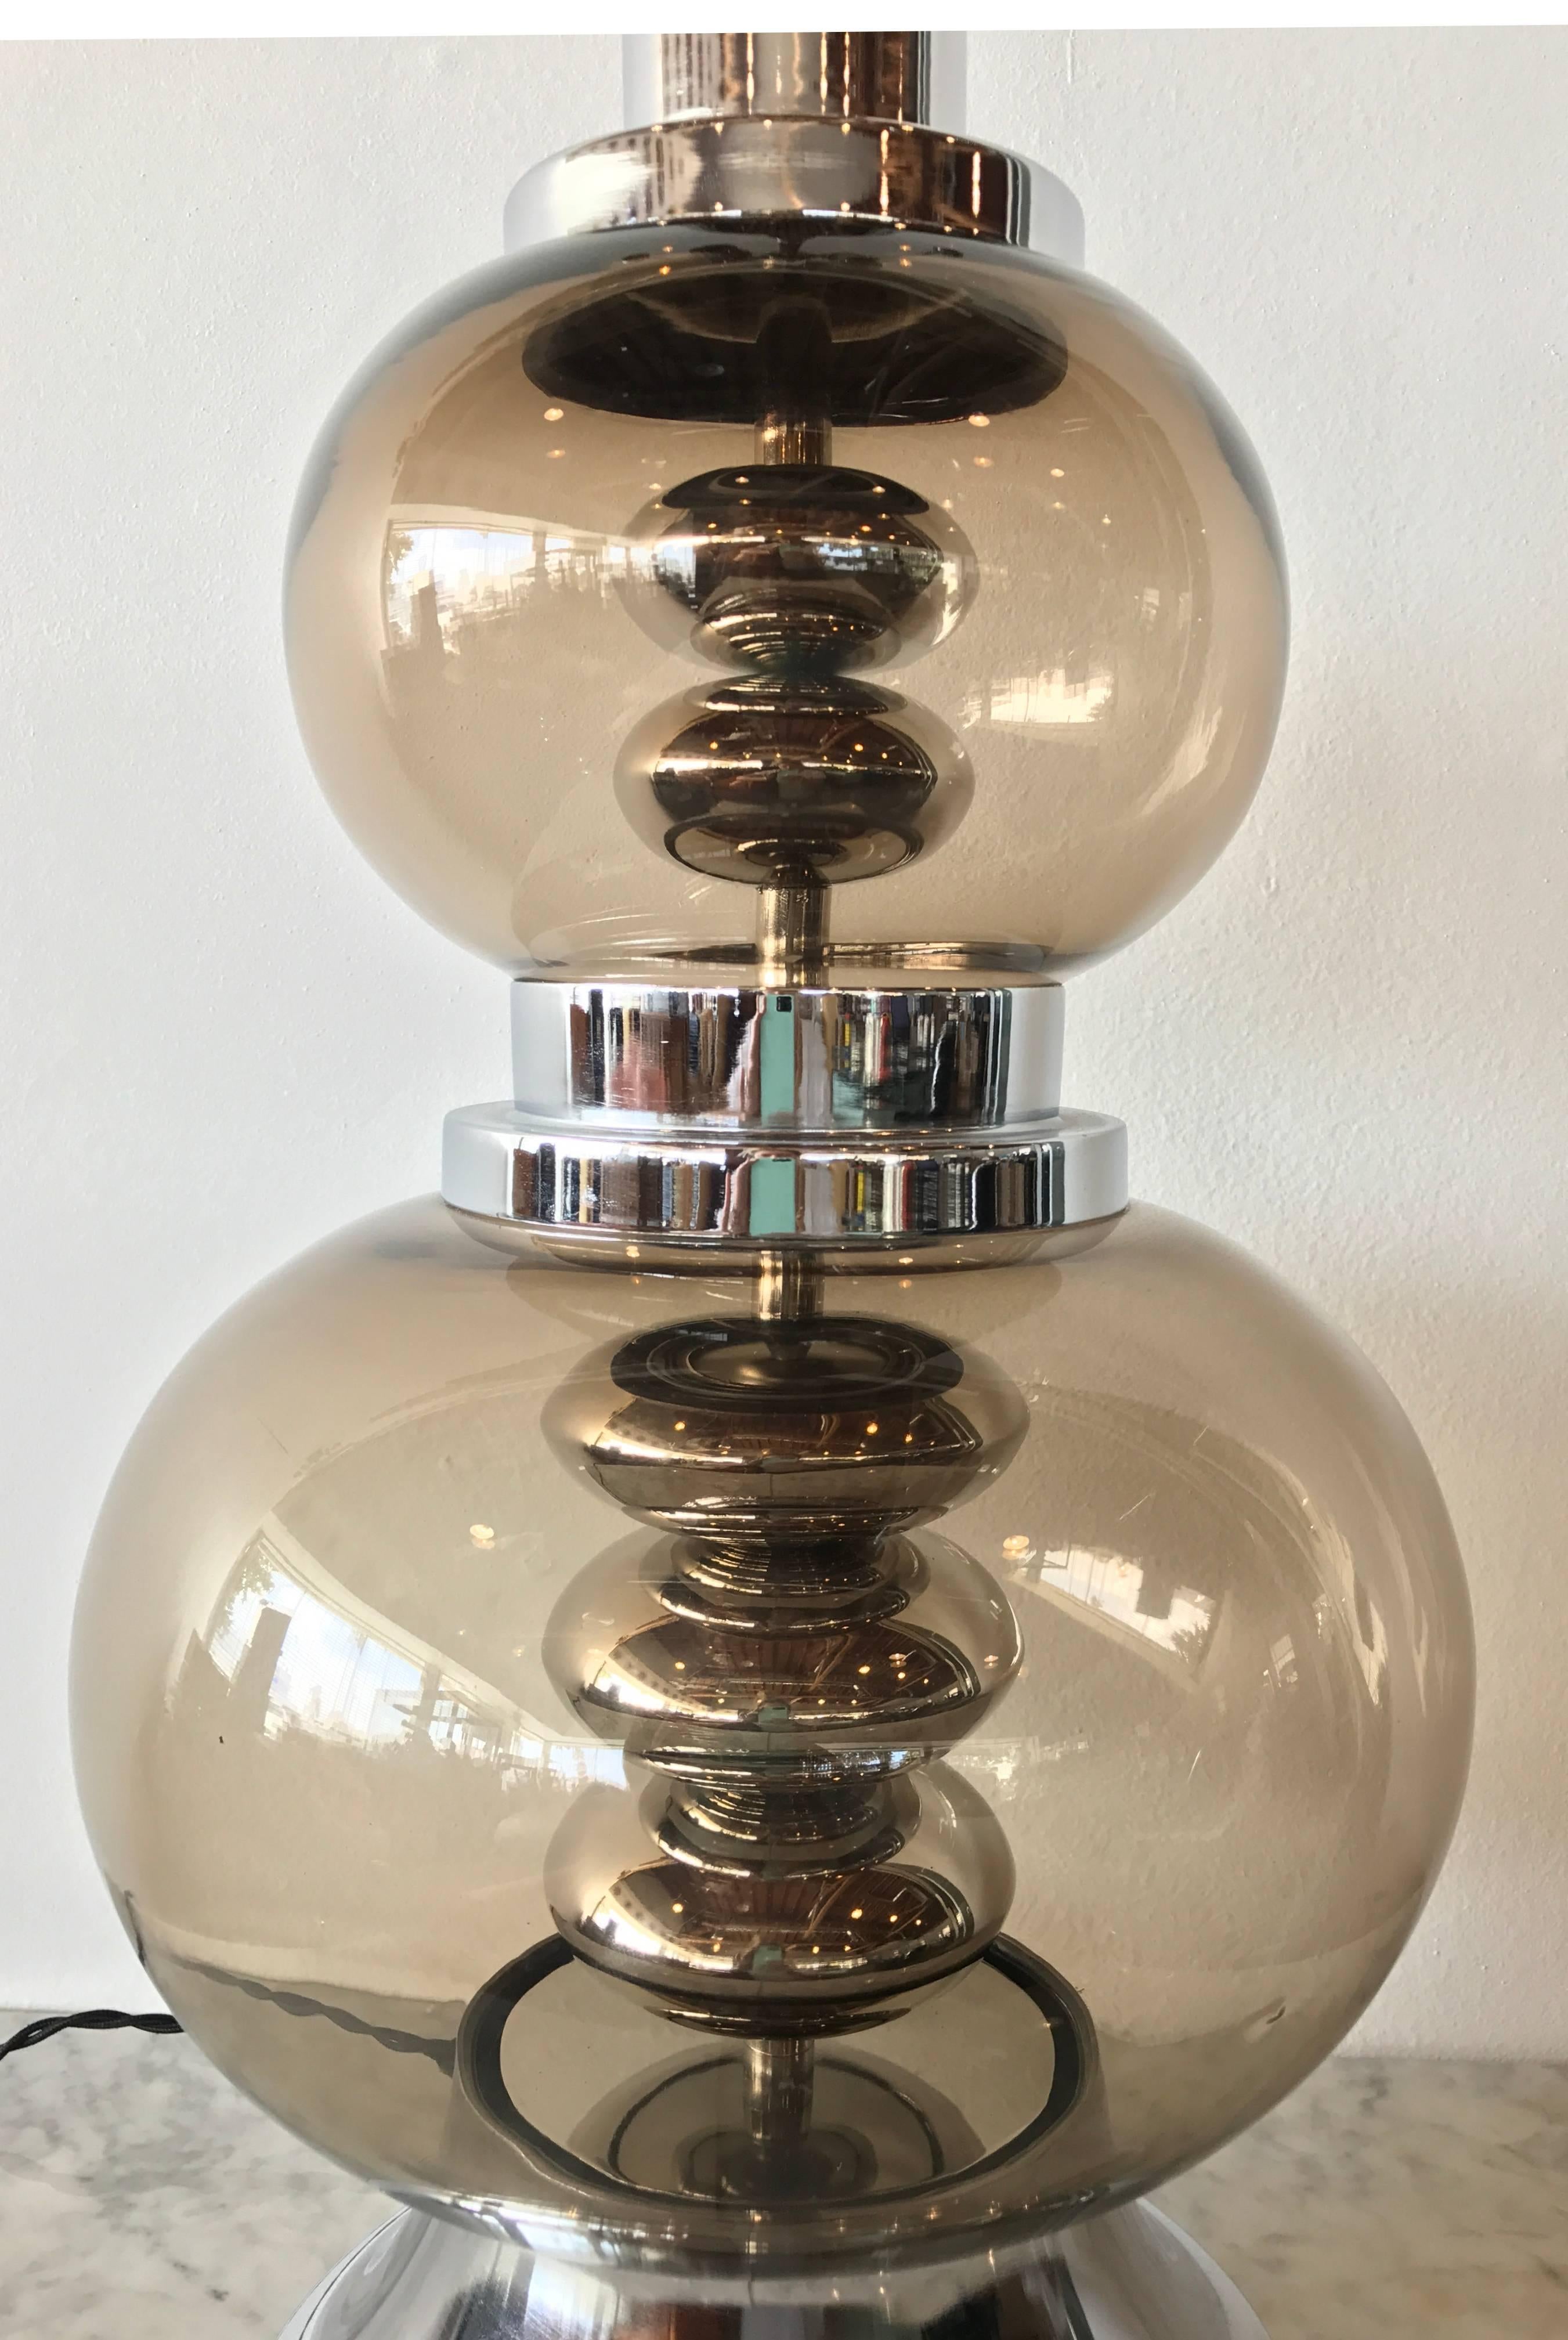 Seductively curvaceous Italian smoked glass table lamp, circa 1970. The soft gray glass with a very subtle amber undertone is punctuated with polished chrome base, middle and stem as well as polished chrome ellipsoids stacked on top of one another